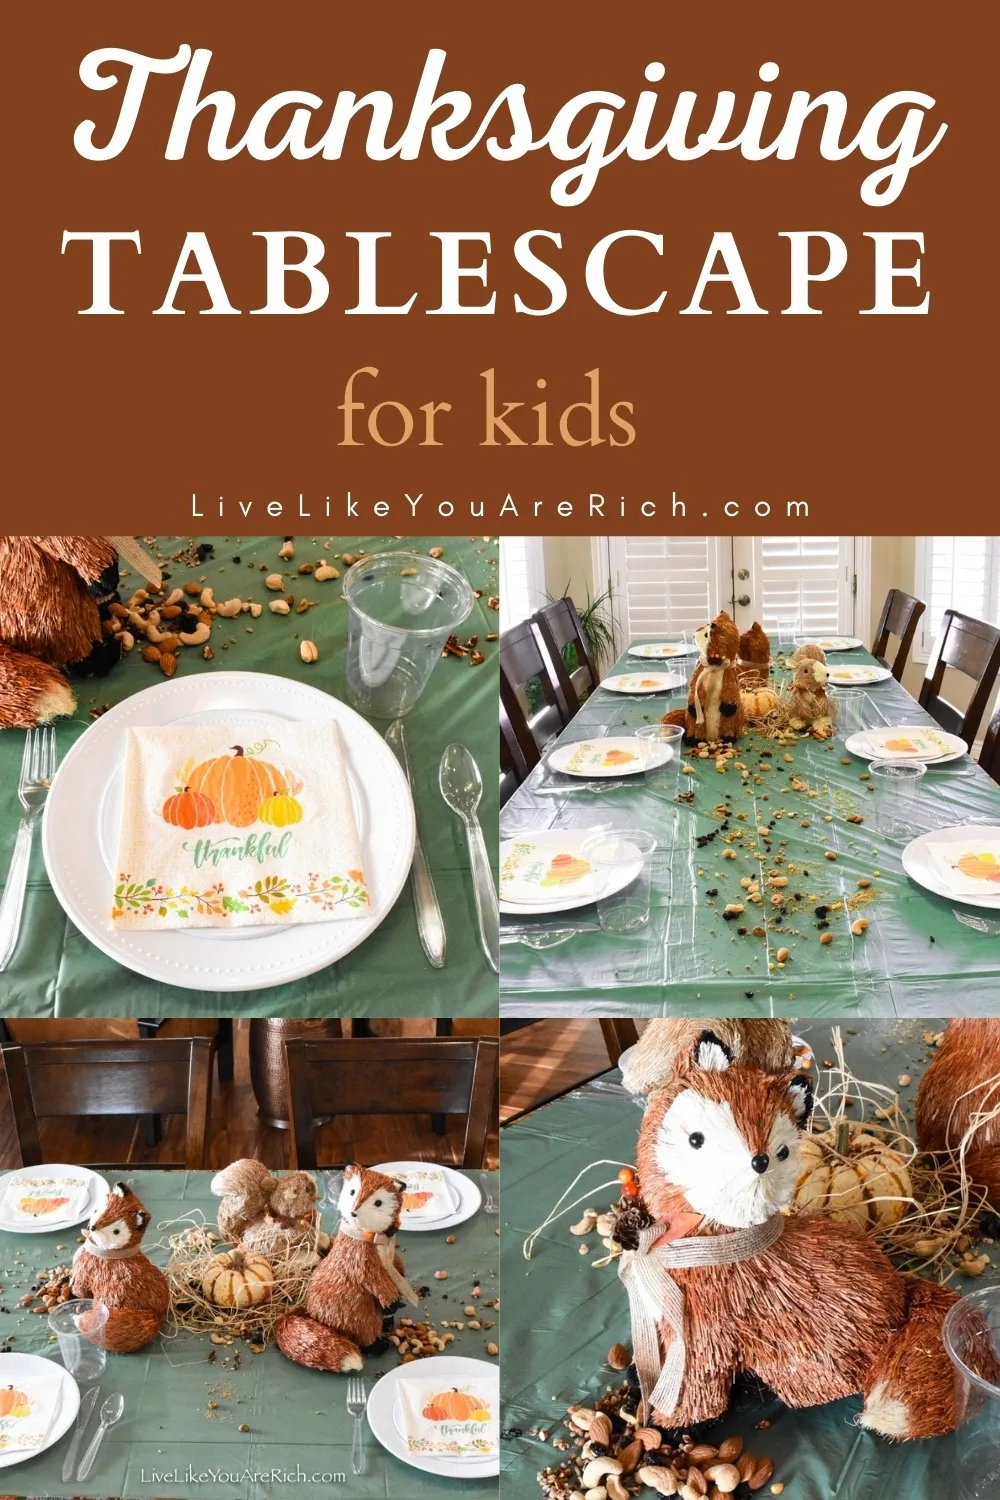 I get to host Thanksgiving dinner and made a Thanksgiving tablescape for kids. This Thanksgiving Tablescape for Kids was very inexpensive to put together. It cost less than $30.00. I had the paper/plastic products. The tablecloth and napkins were $1.00 each at the Dollar Tree. #thanksgiving #thanksgivingtablescape 